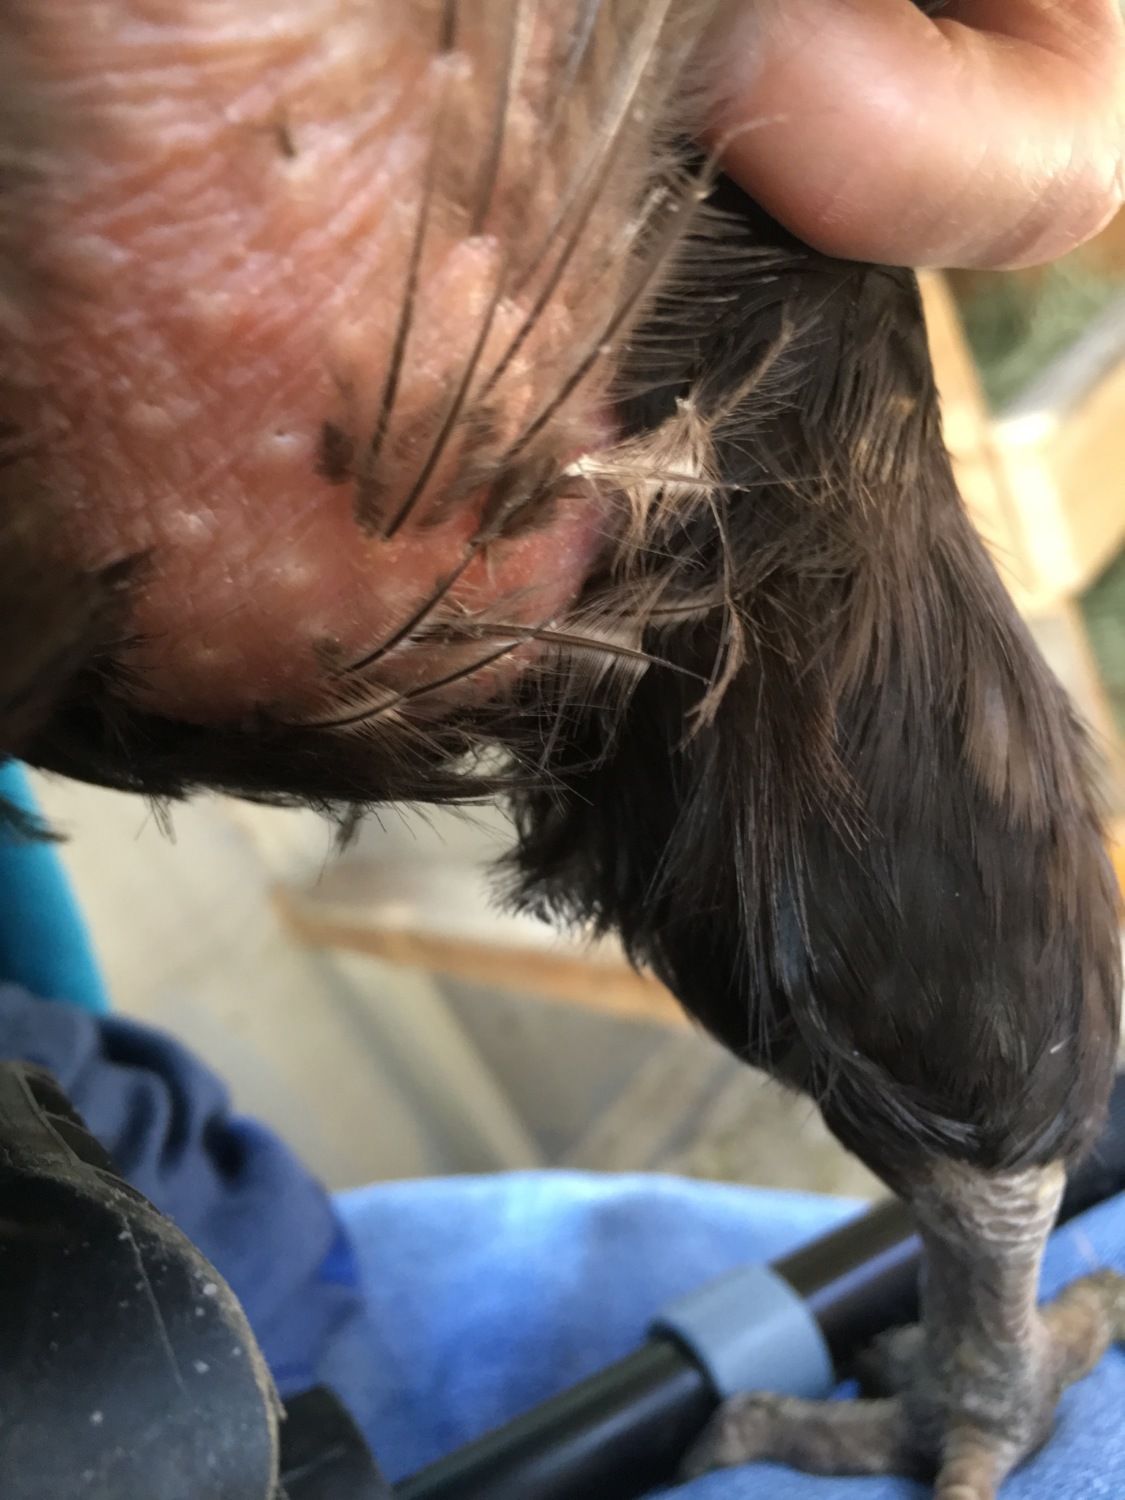 Balding on front of neck under chin